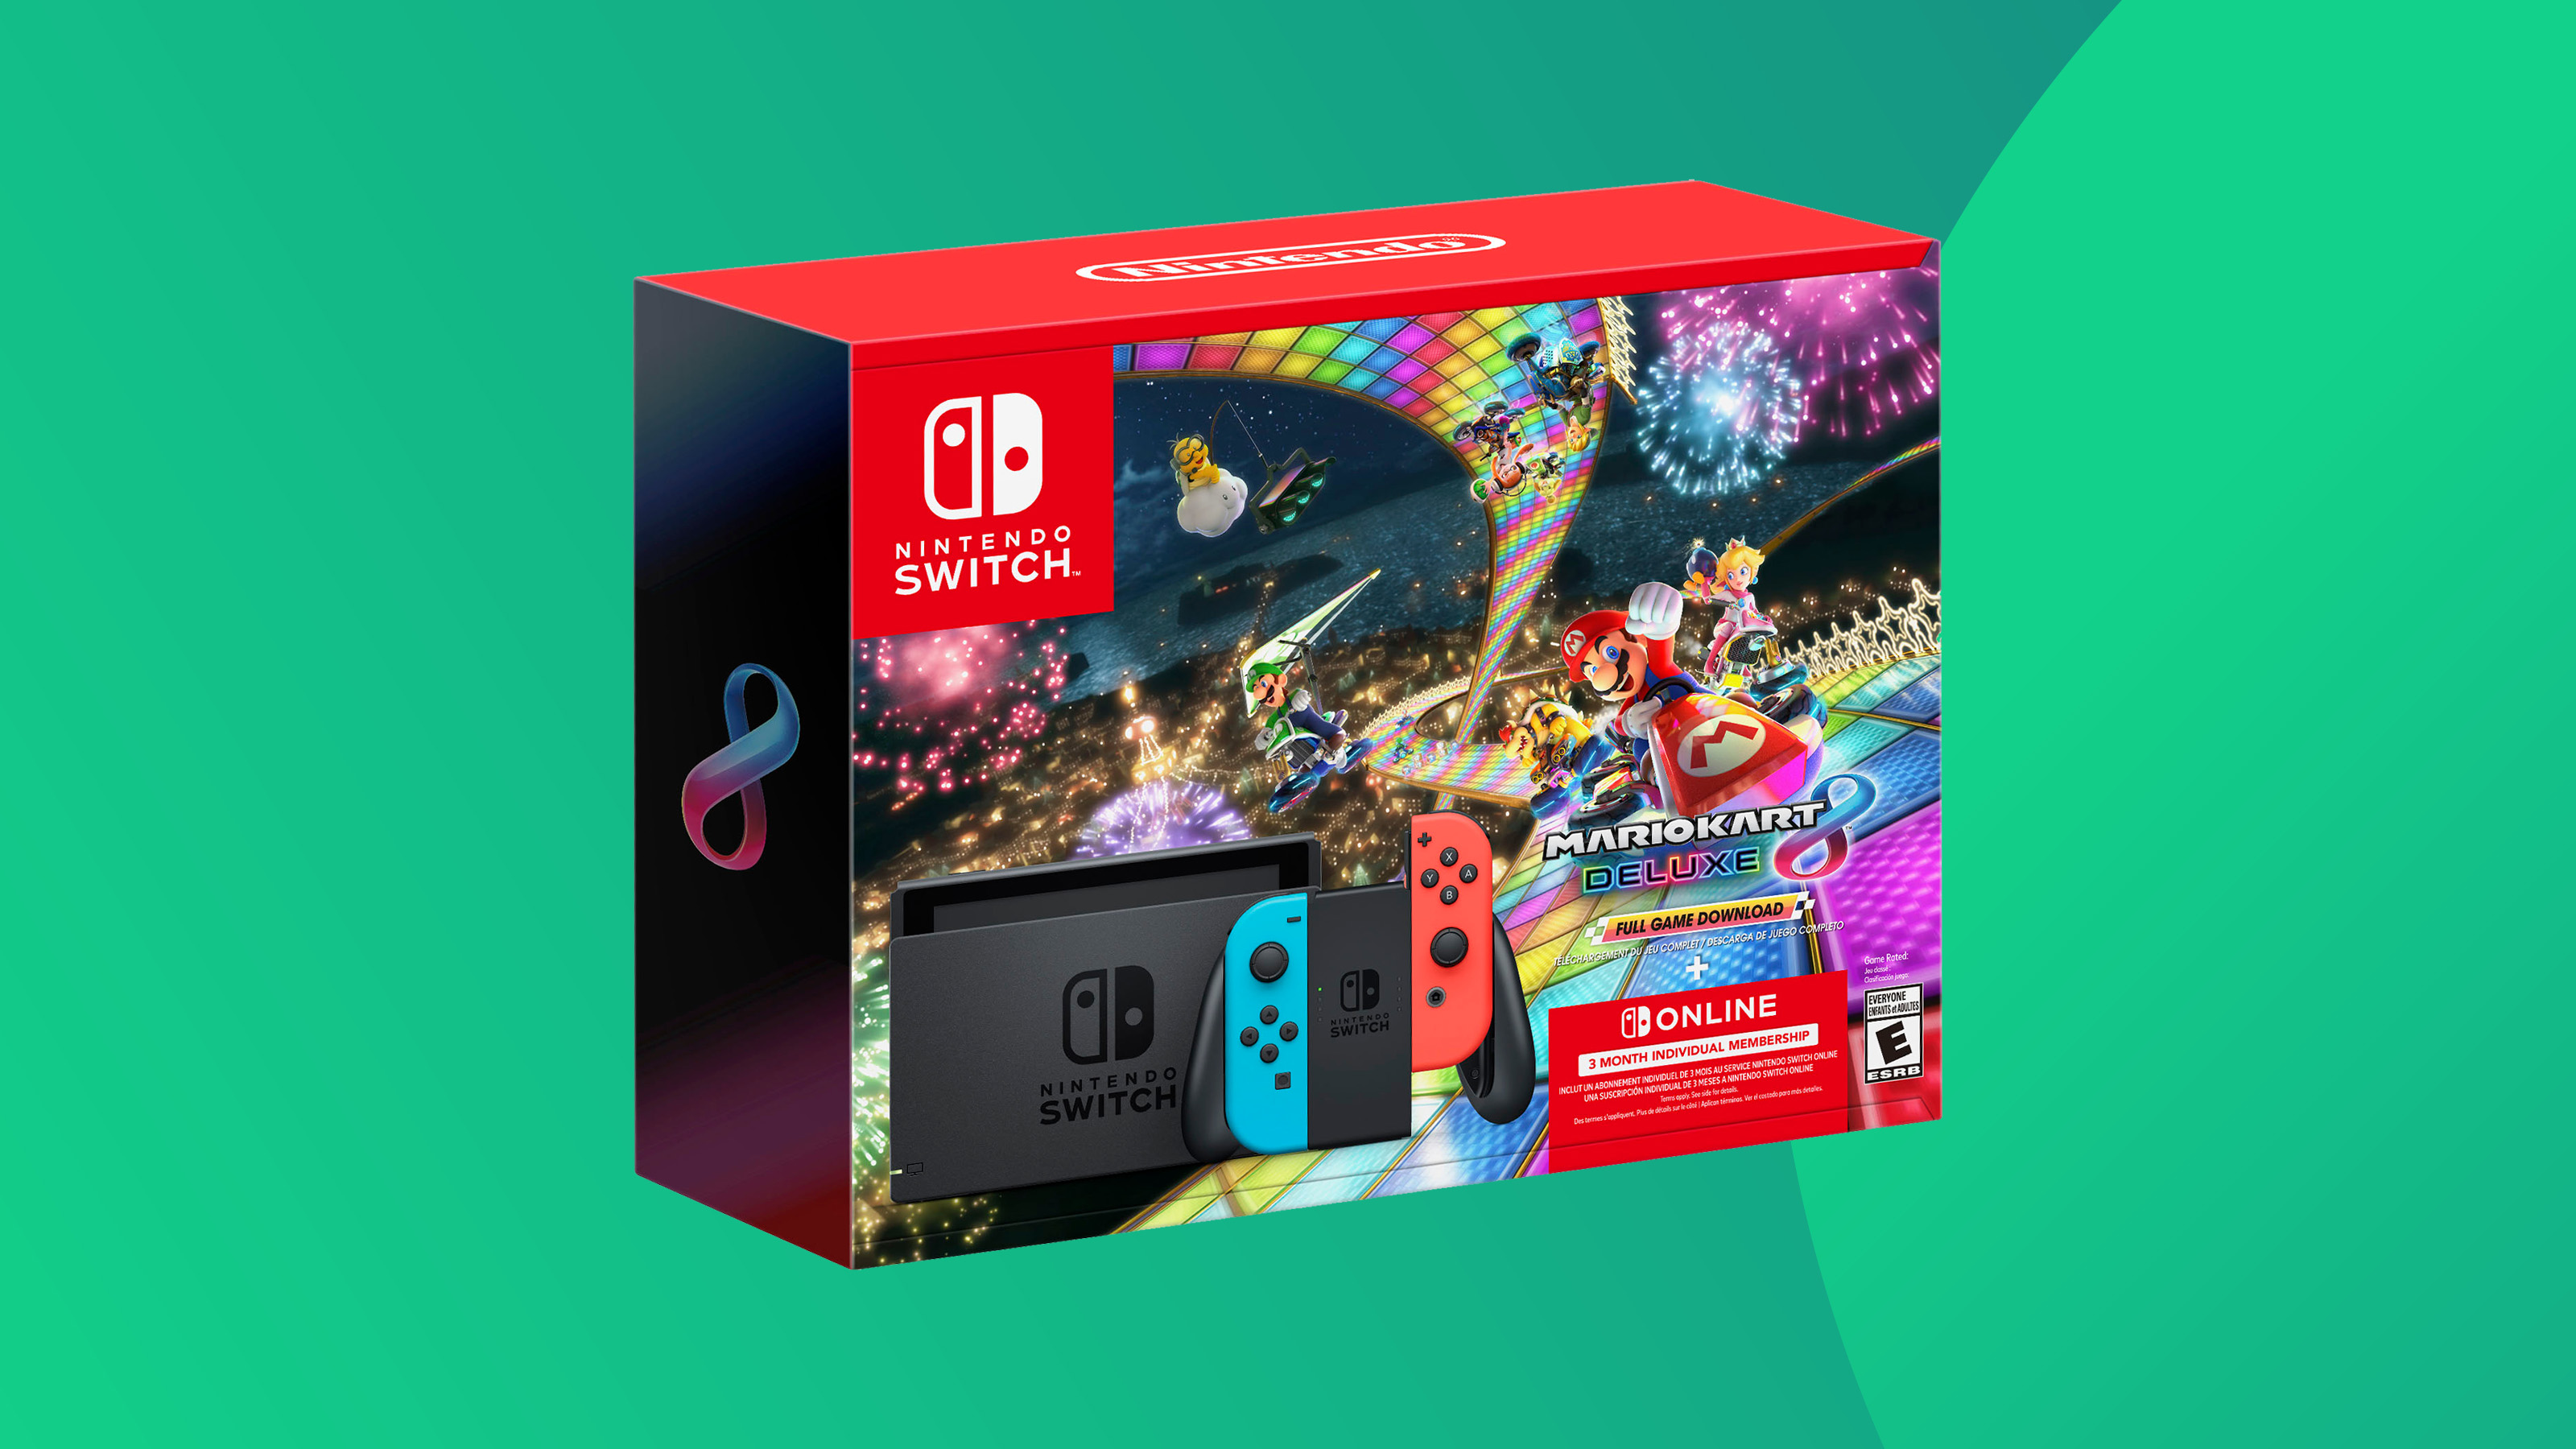 a promotional image of the Nintendo Switch bundle